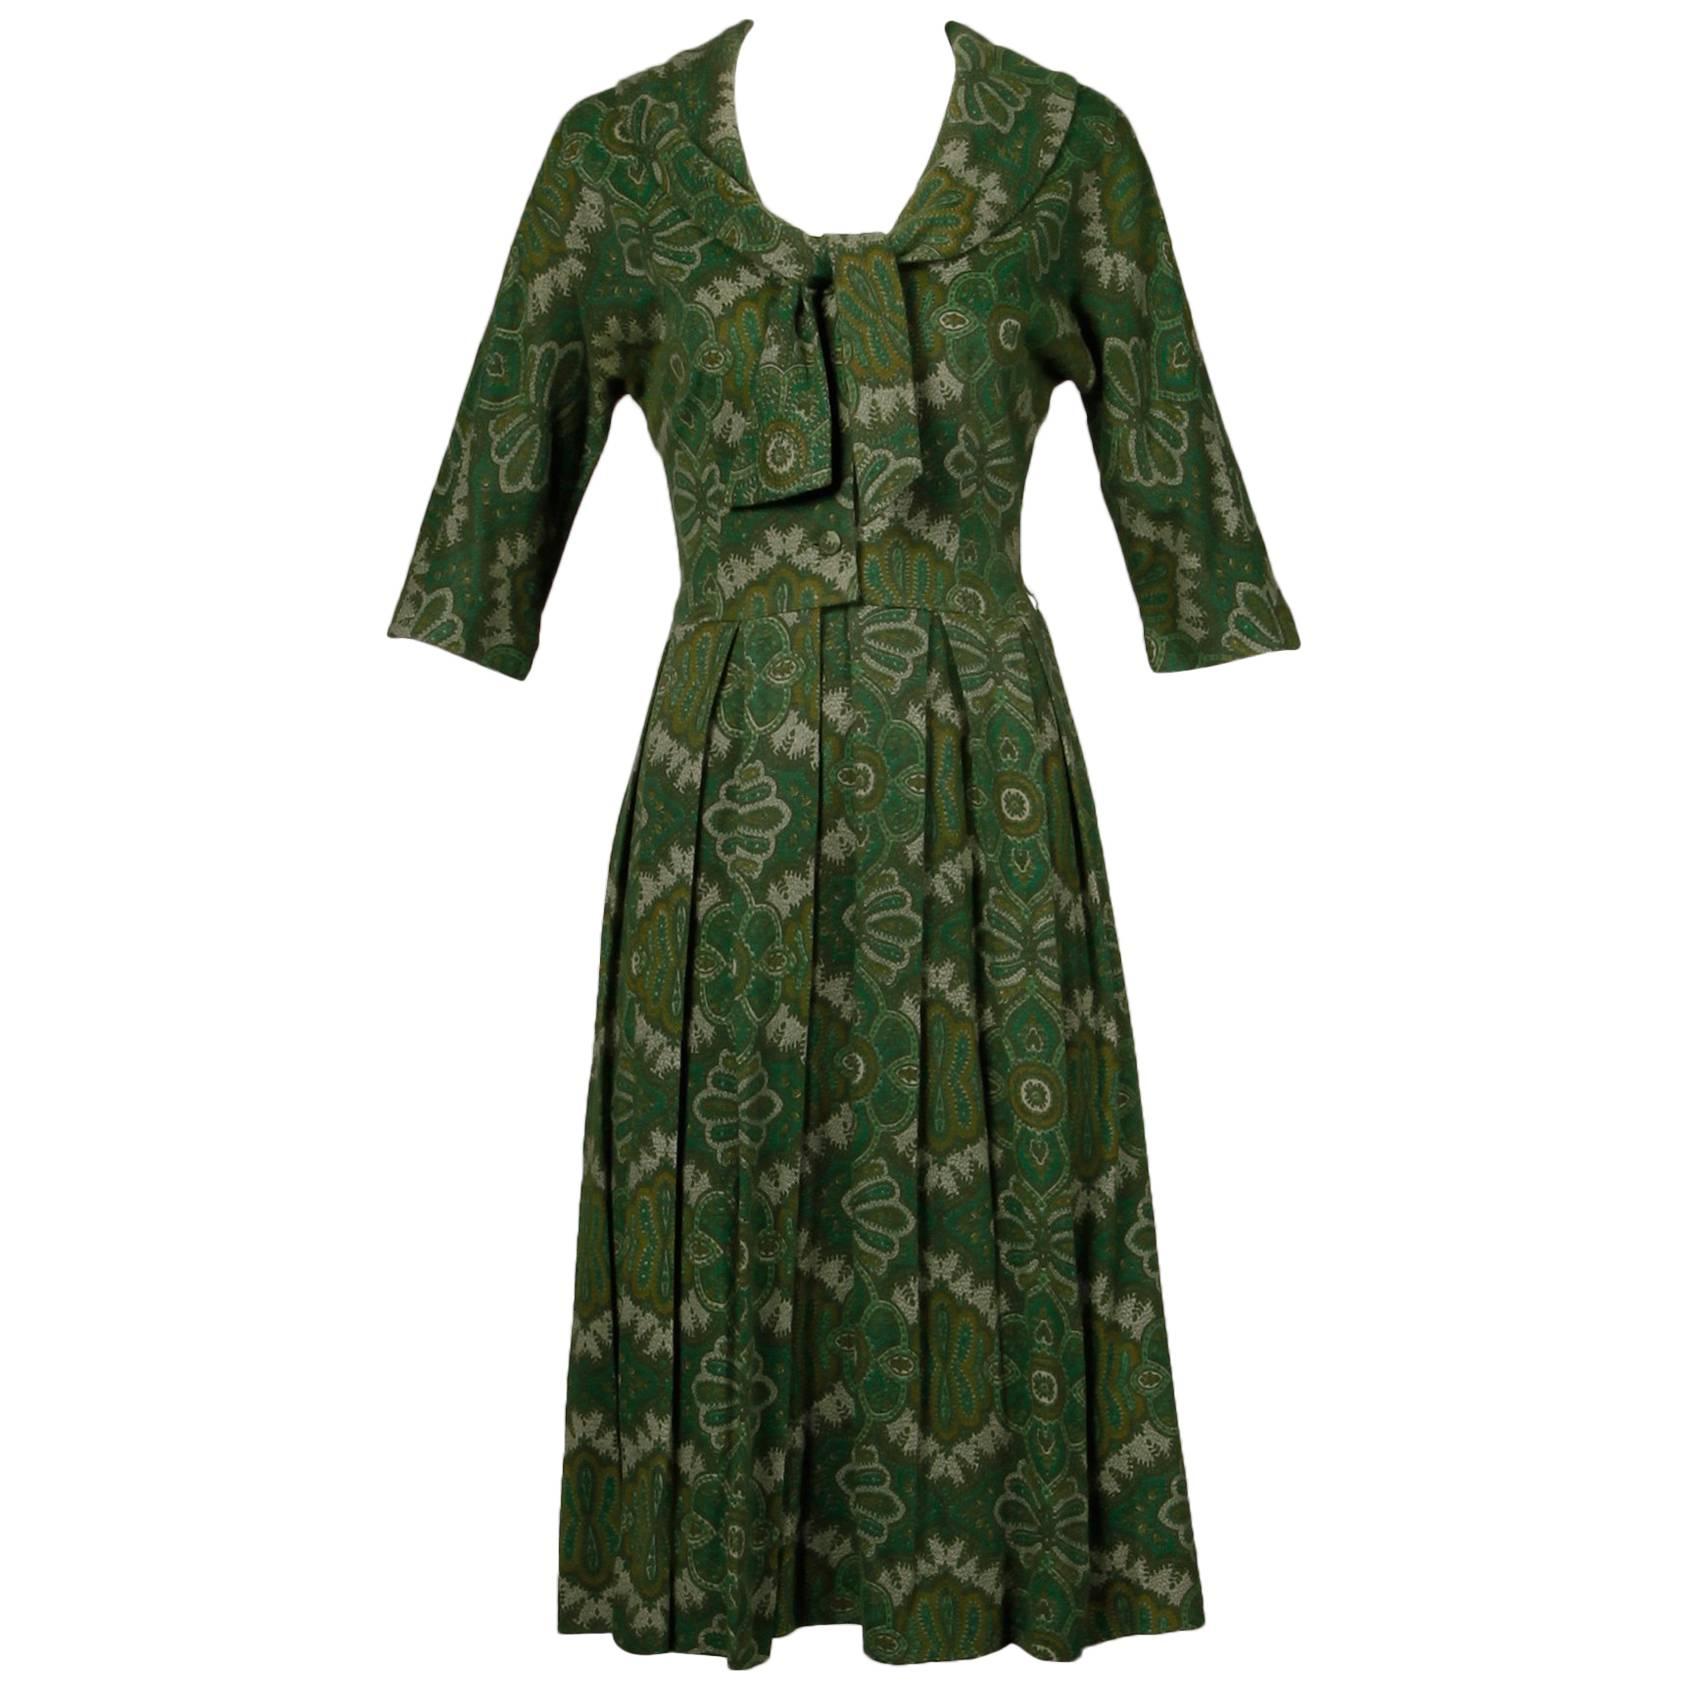 1950s Jerry Gilden Vintage Green Paisley Wool Day Dress with Ascot Bow Tie